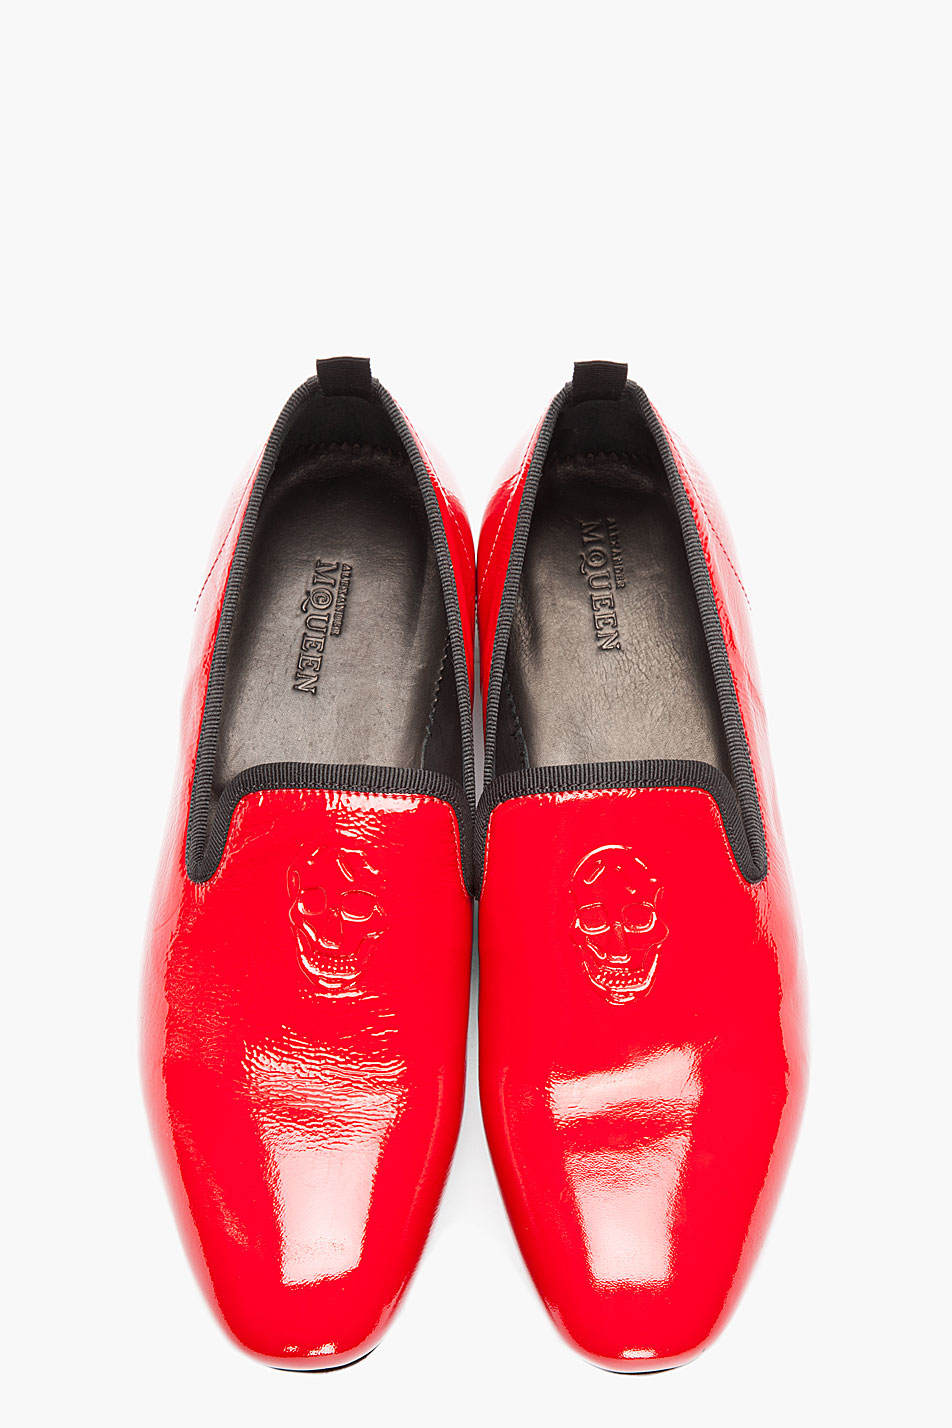 Lyst - Alexander McQueen Red Patent Leather Loafers in Red for Men